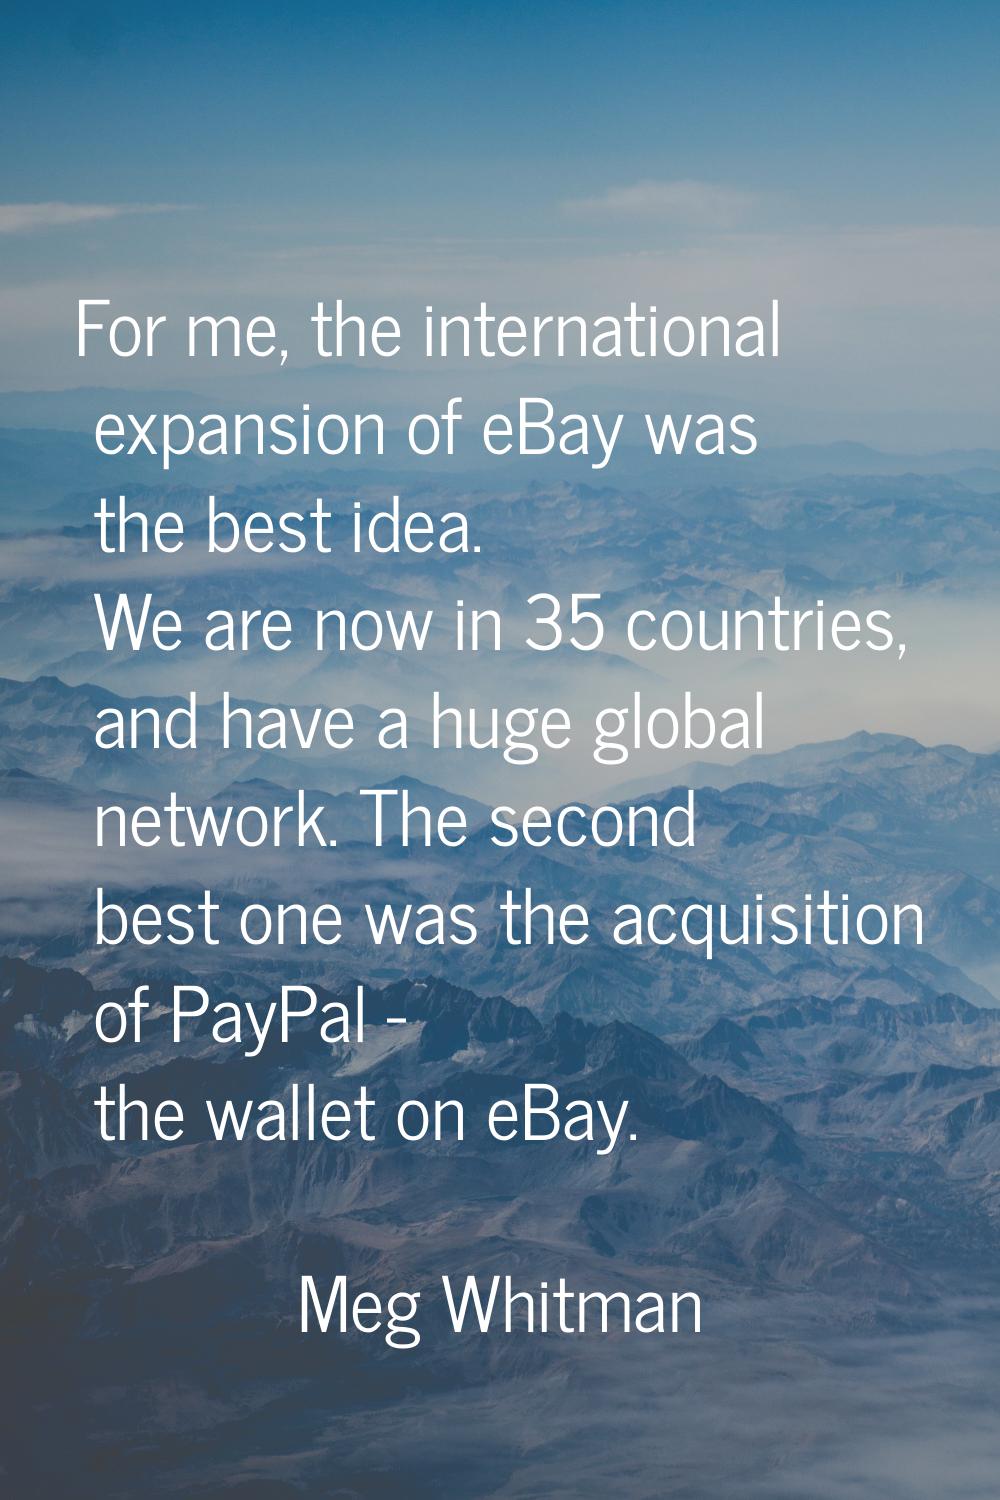 For me, the international expansion of eBay was the best idea. We are now in 35 countries, and have